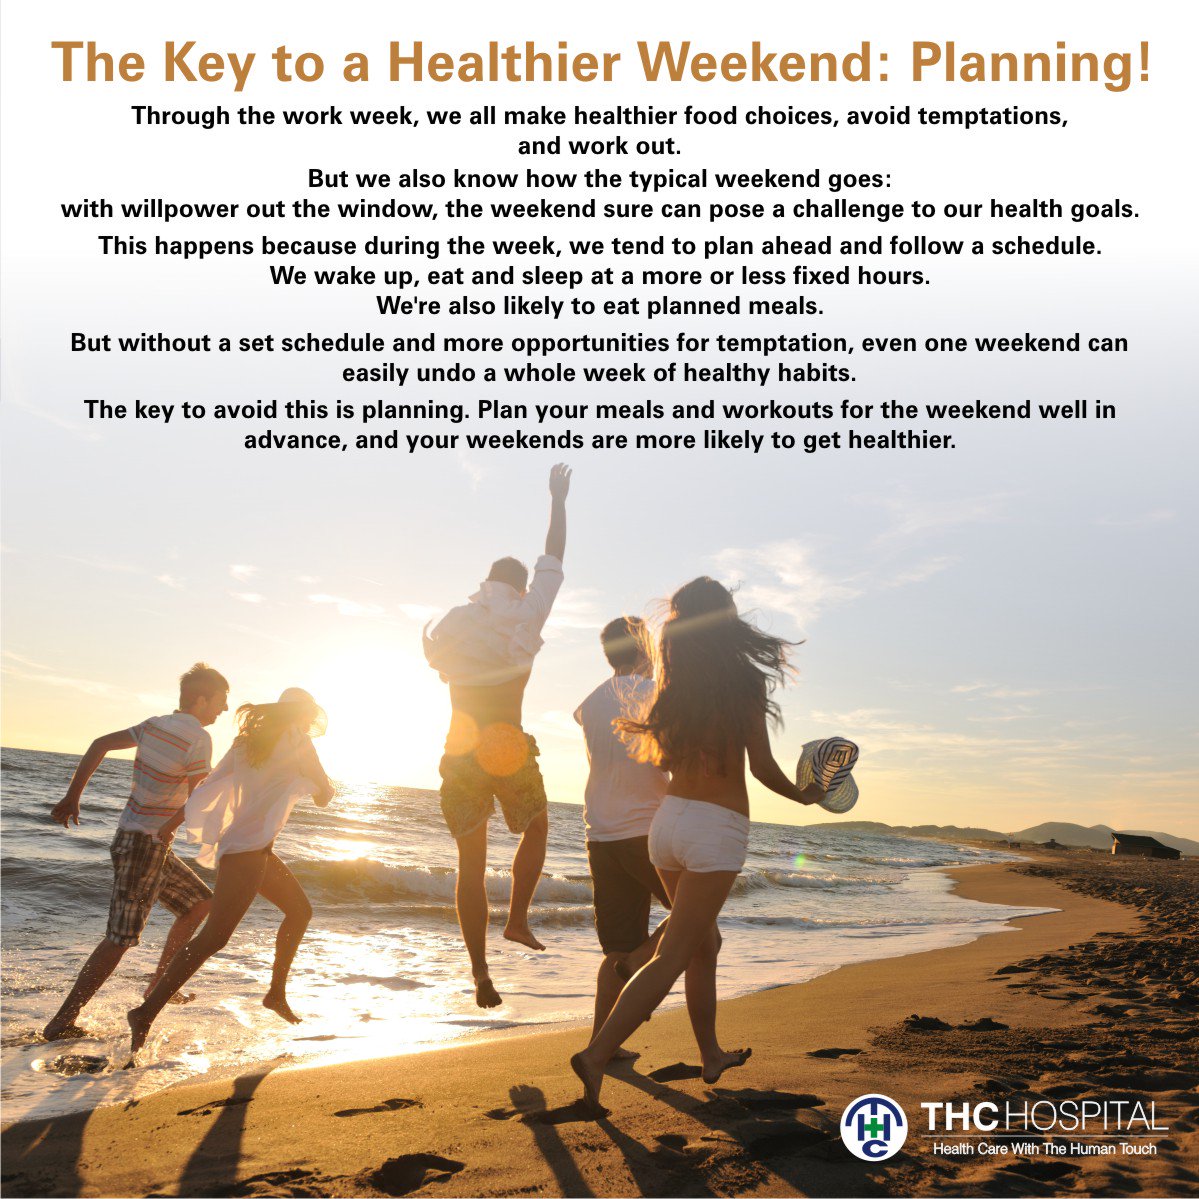 Follow @thchospital for more on #health and #wellbeing. Tag someone who’ll like this!
#THCcares 
thanehealthcare.com
#thanehealthcare #HealthierWeekend #workweek #healthierfood #avoidtemptations #willpower #poseachallenge #healthgoals #schedule #wakeup #eat #sleep